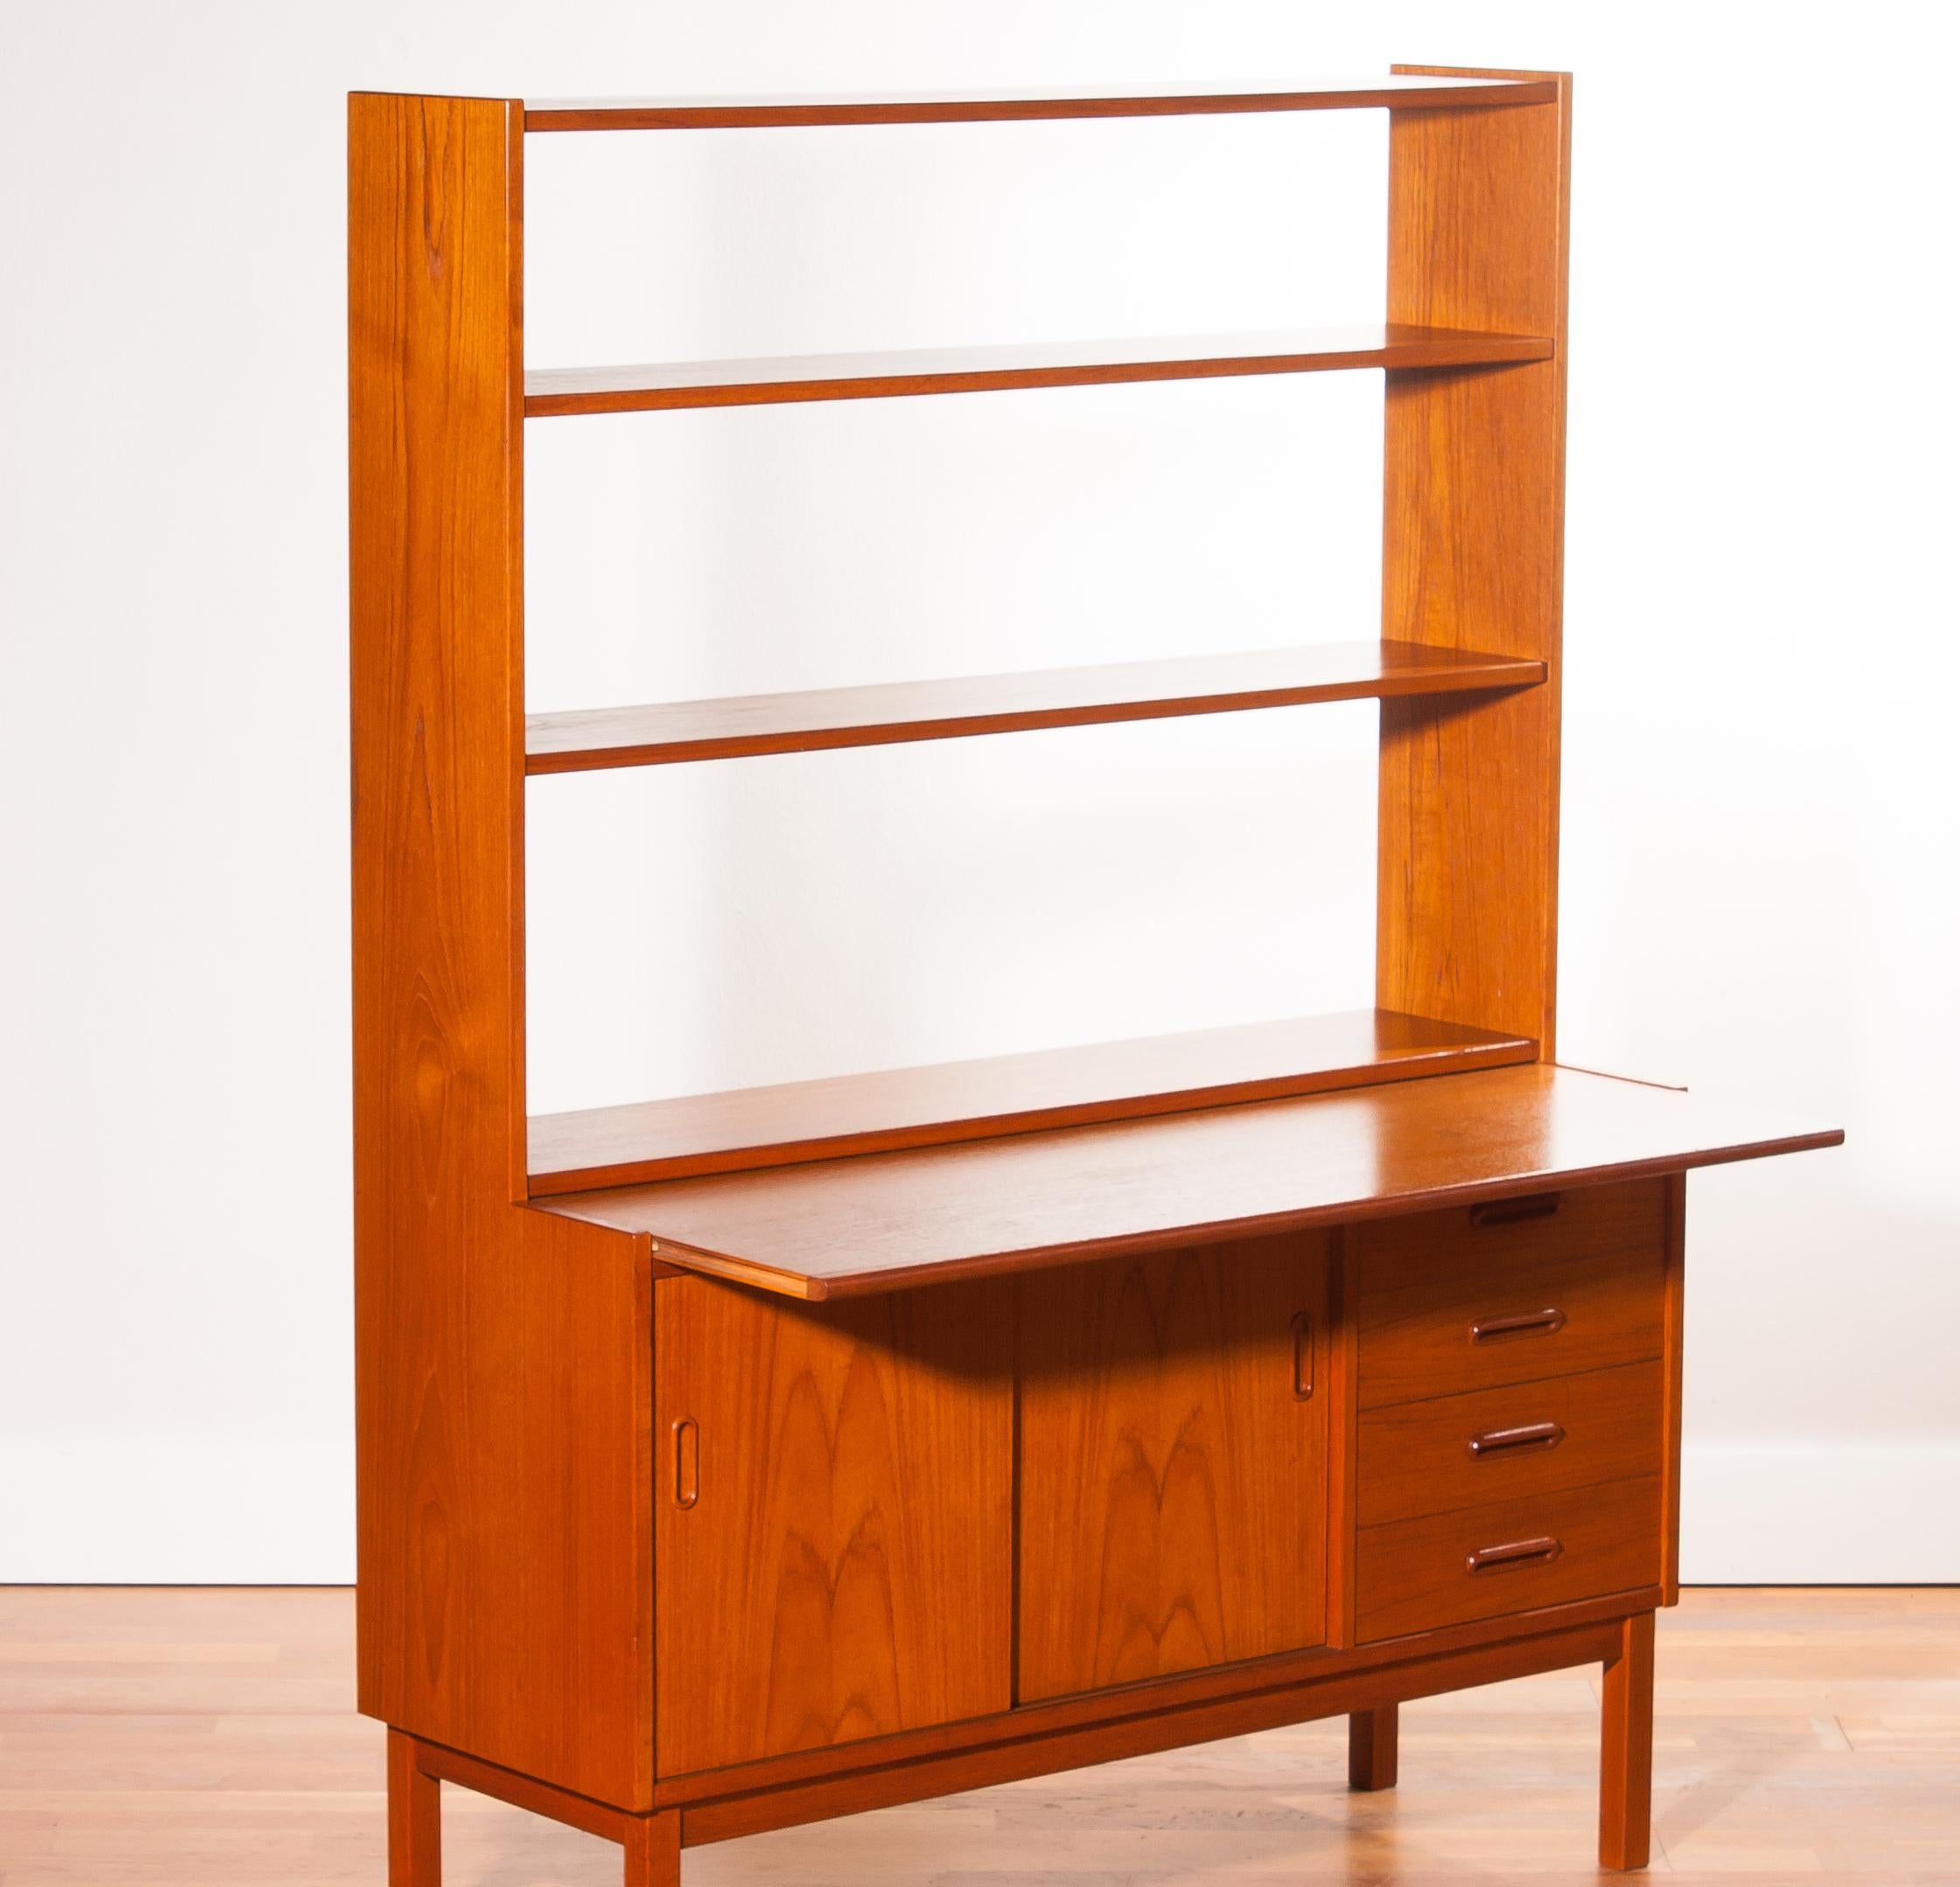 1960s, Teak Book Case with Slidable Writing / Working Space from Sweden 2